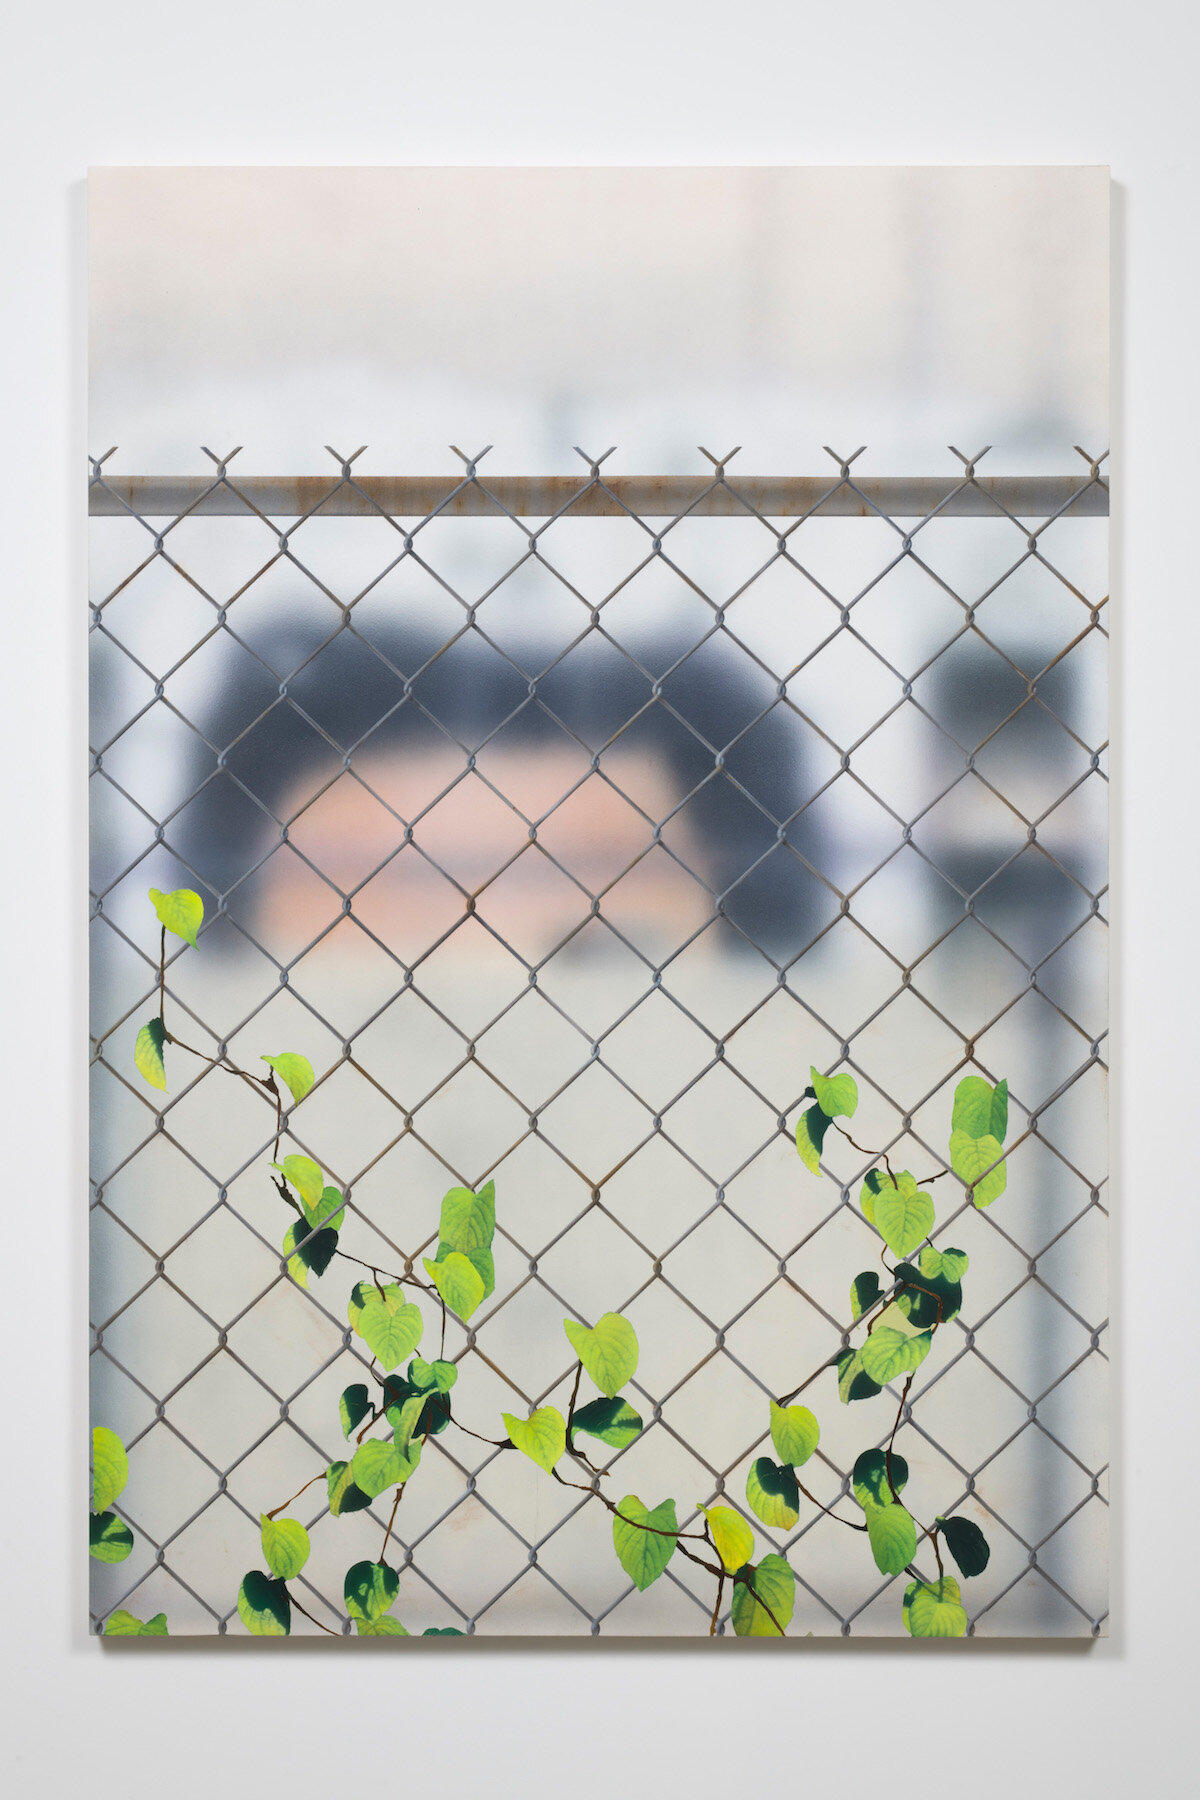   Mural with Chain Link and Ivy,  2017. Acrylic on canvas. 72 x 50 inches 